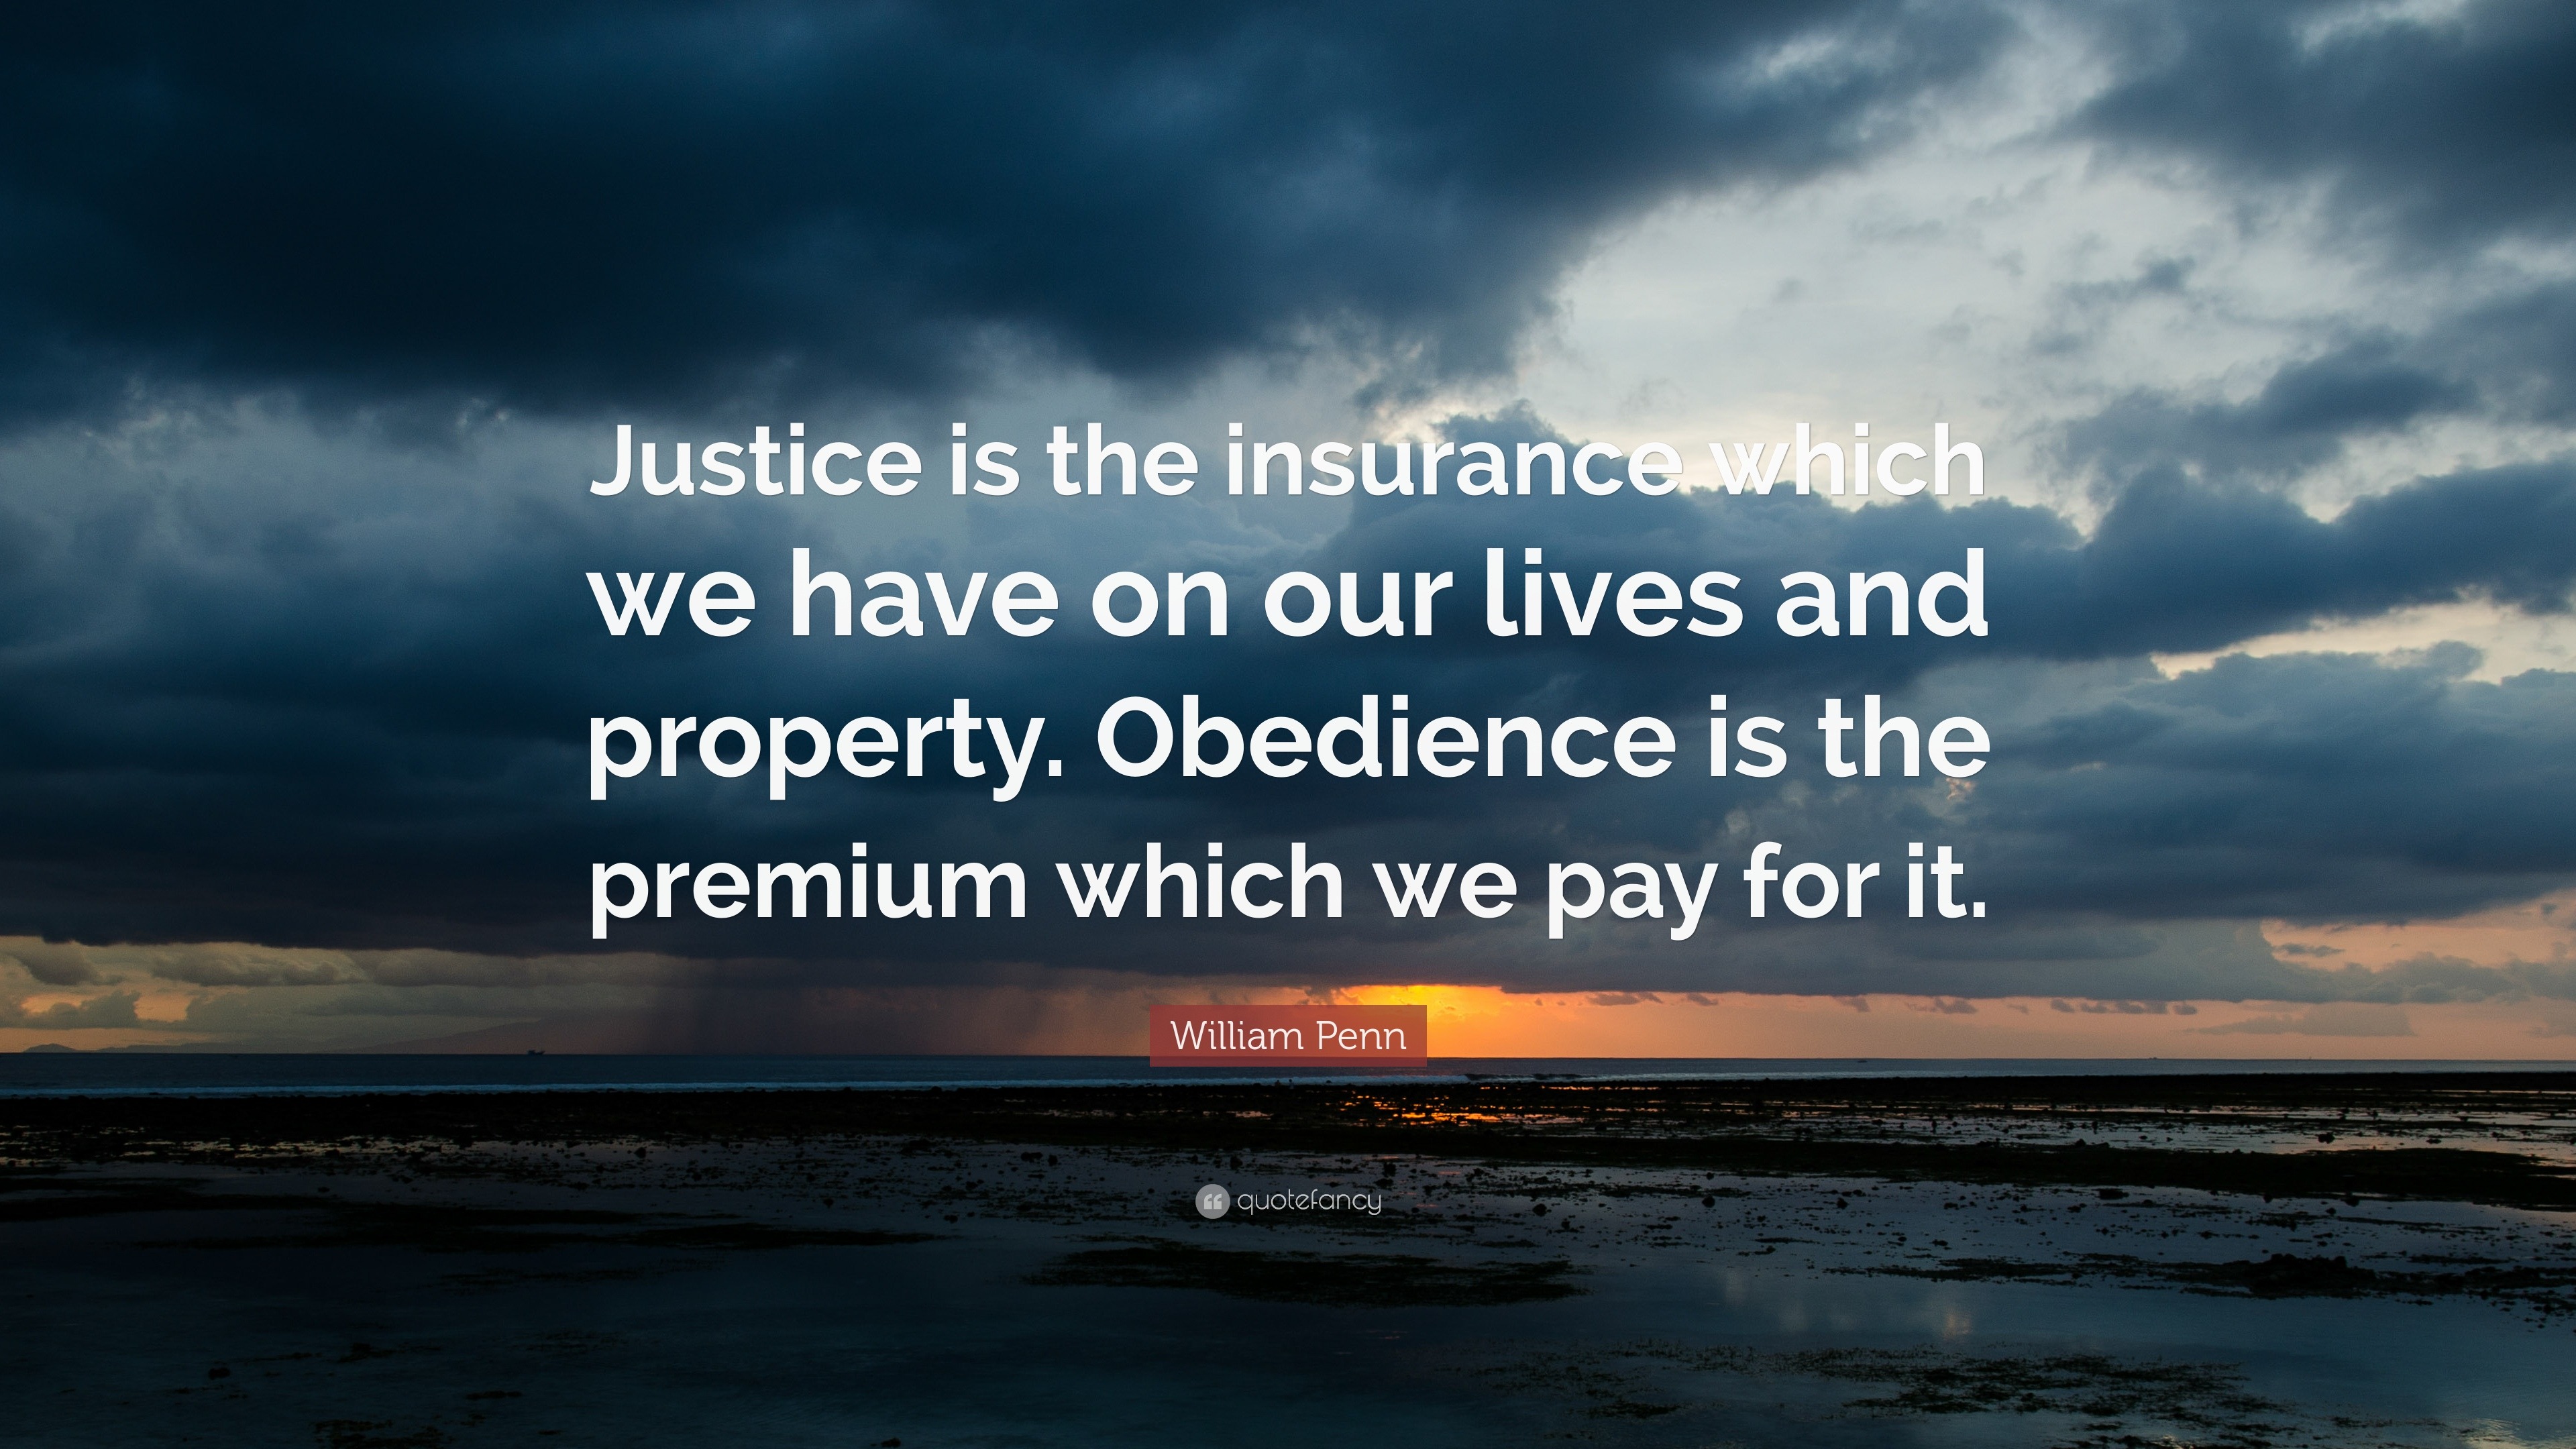 William Penn Quote “Justice is the insurance which we have on our lives and